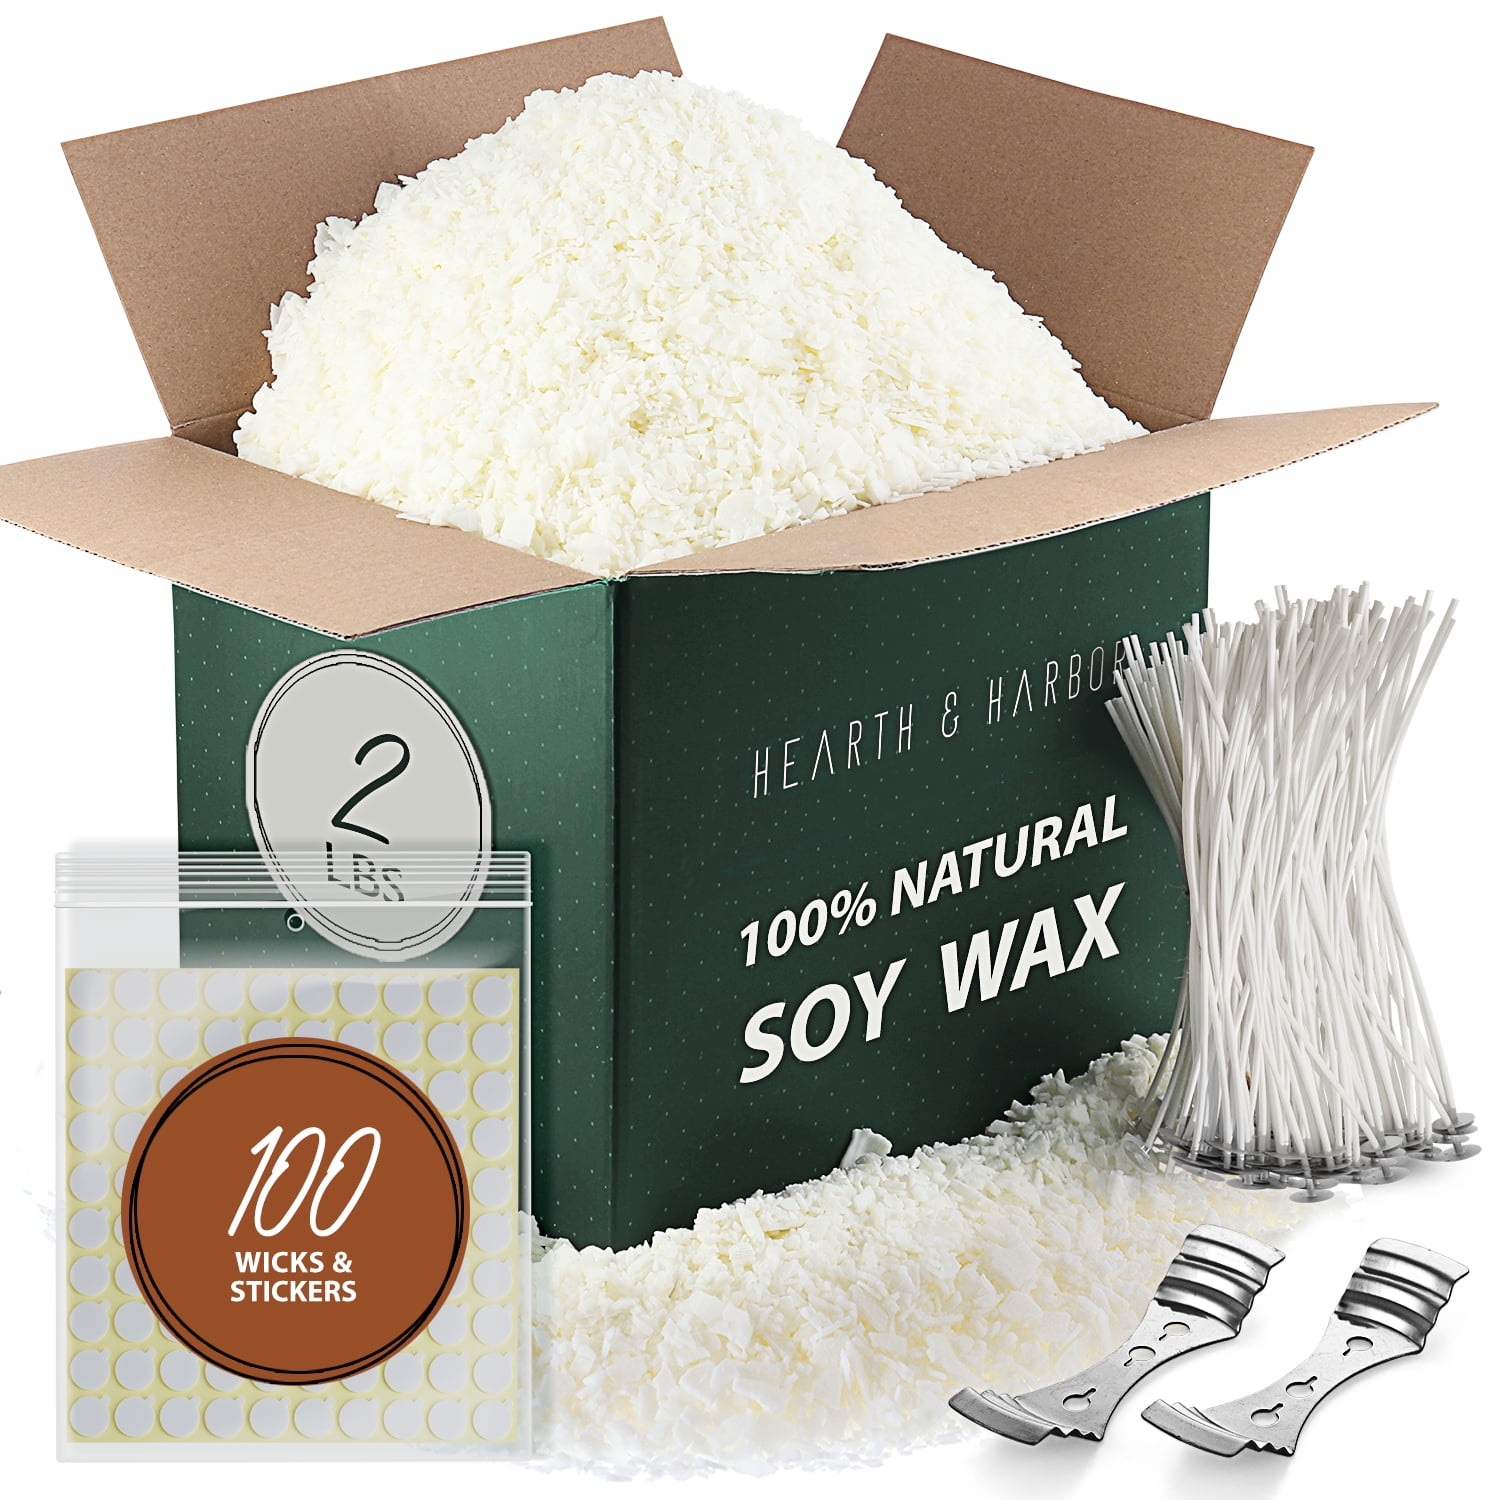 Soy Wax – Let's Make Candles